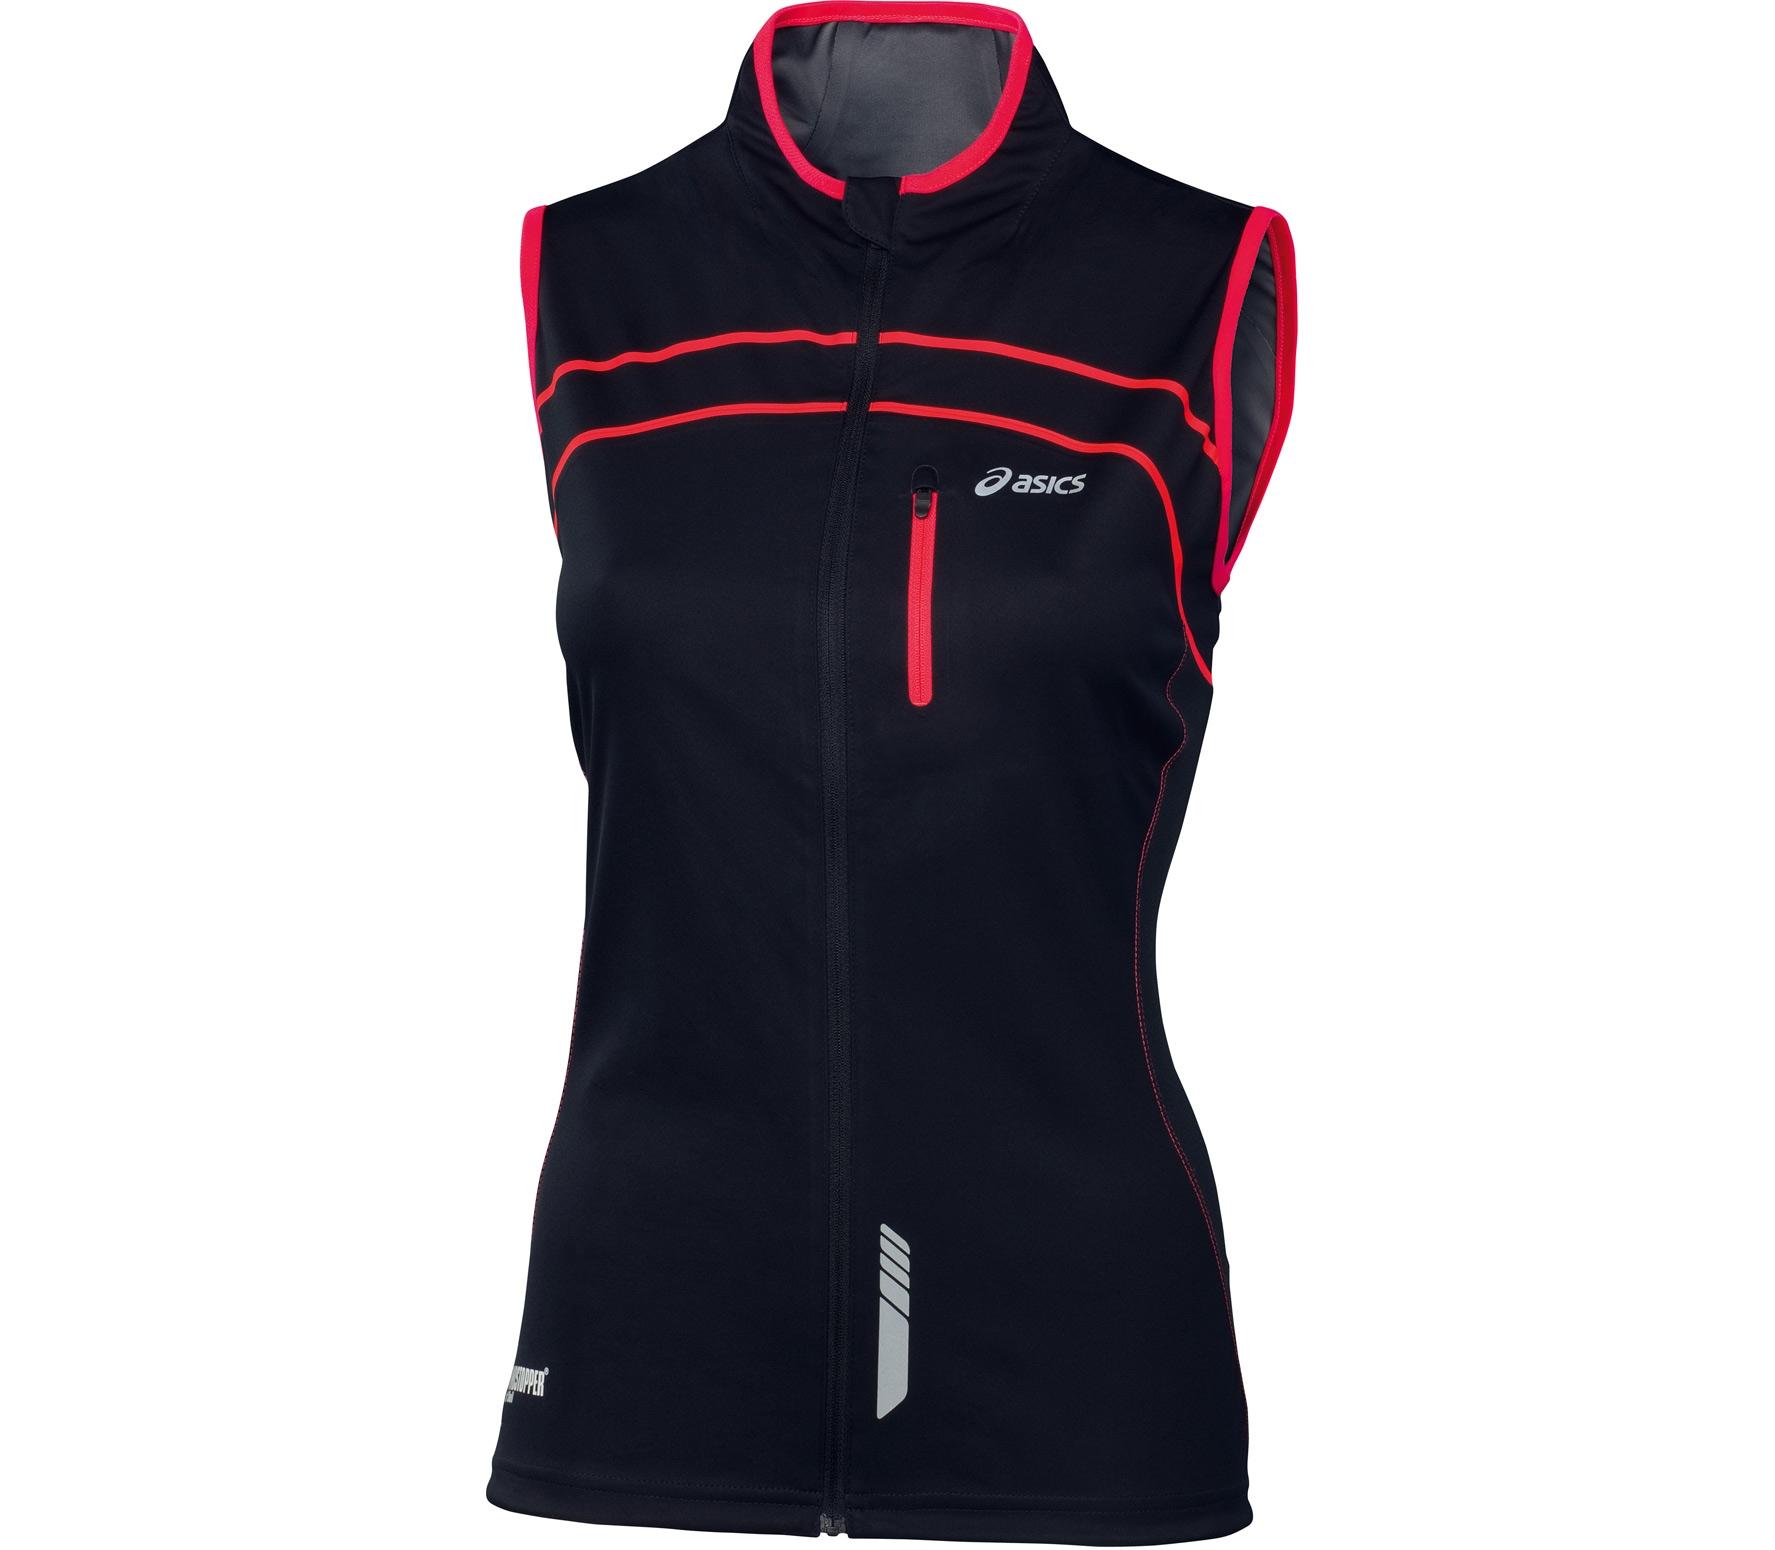 Foto Asics - Chaleco Running Mujer Gore Gillet - FS13 foto 865265